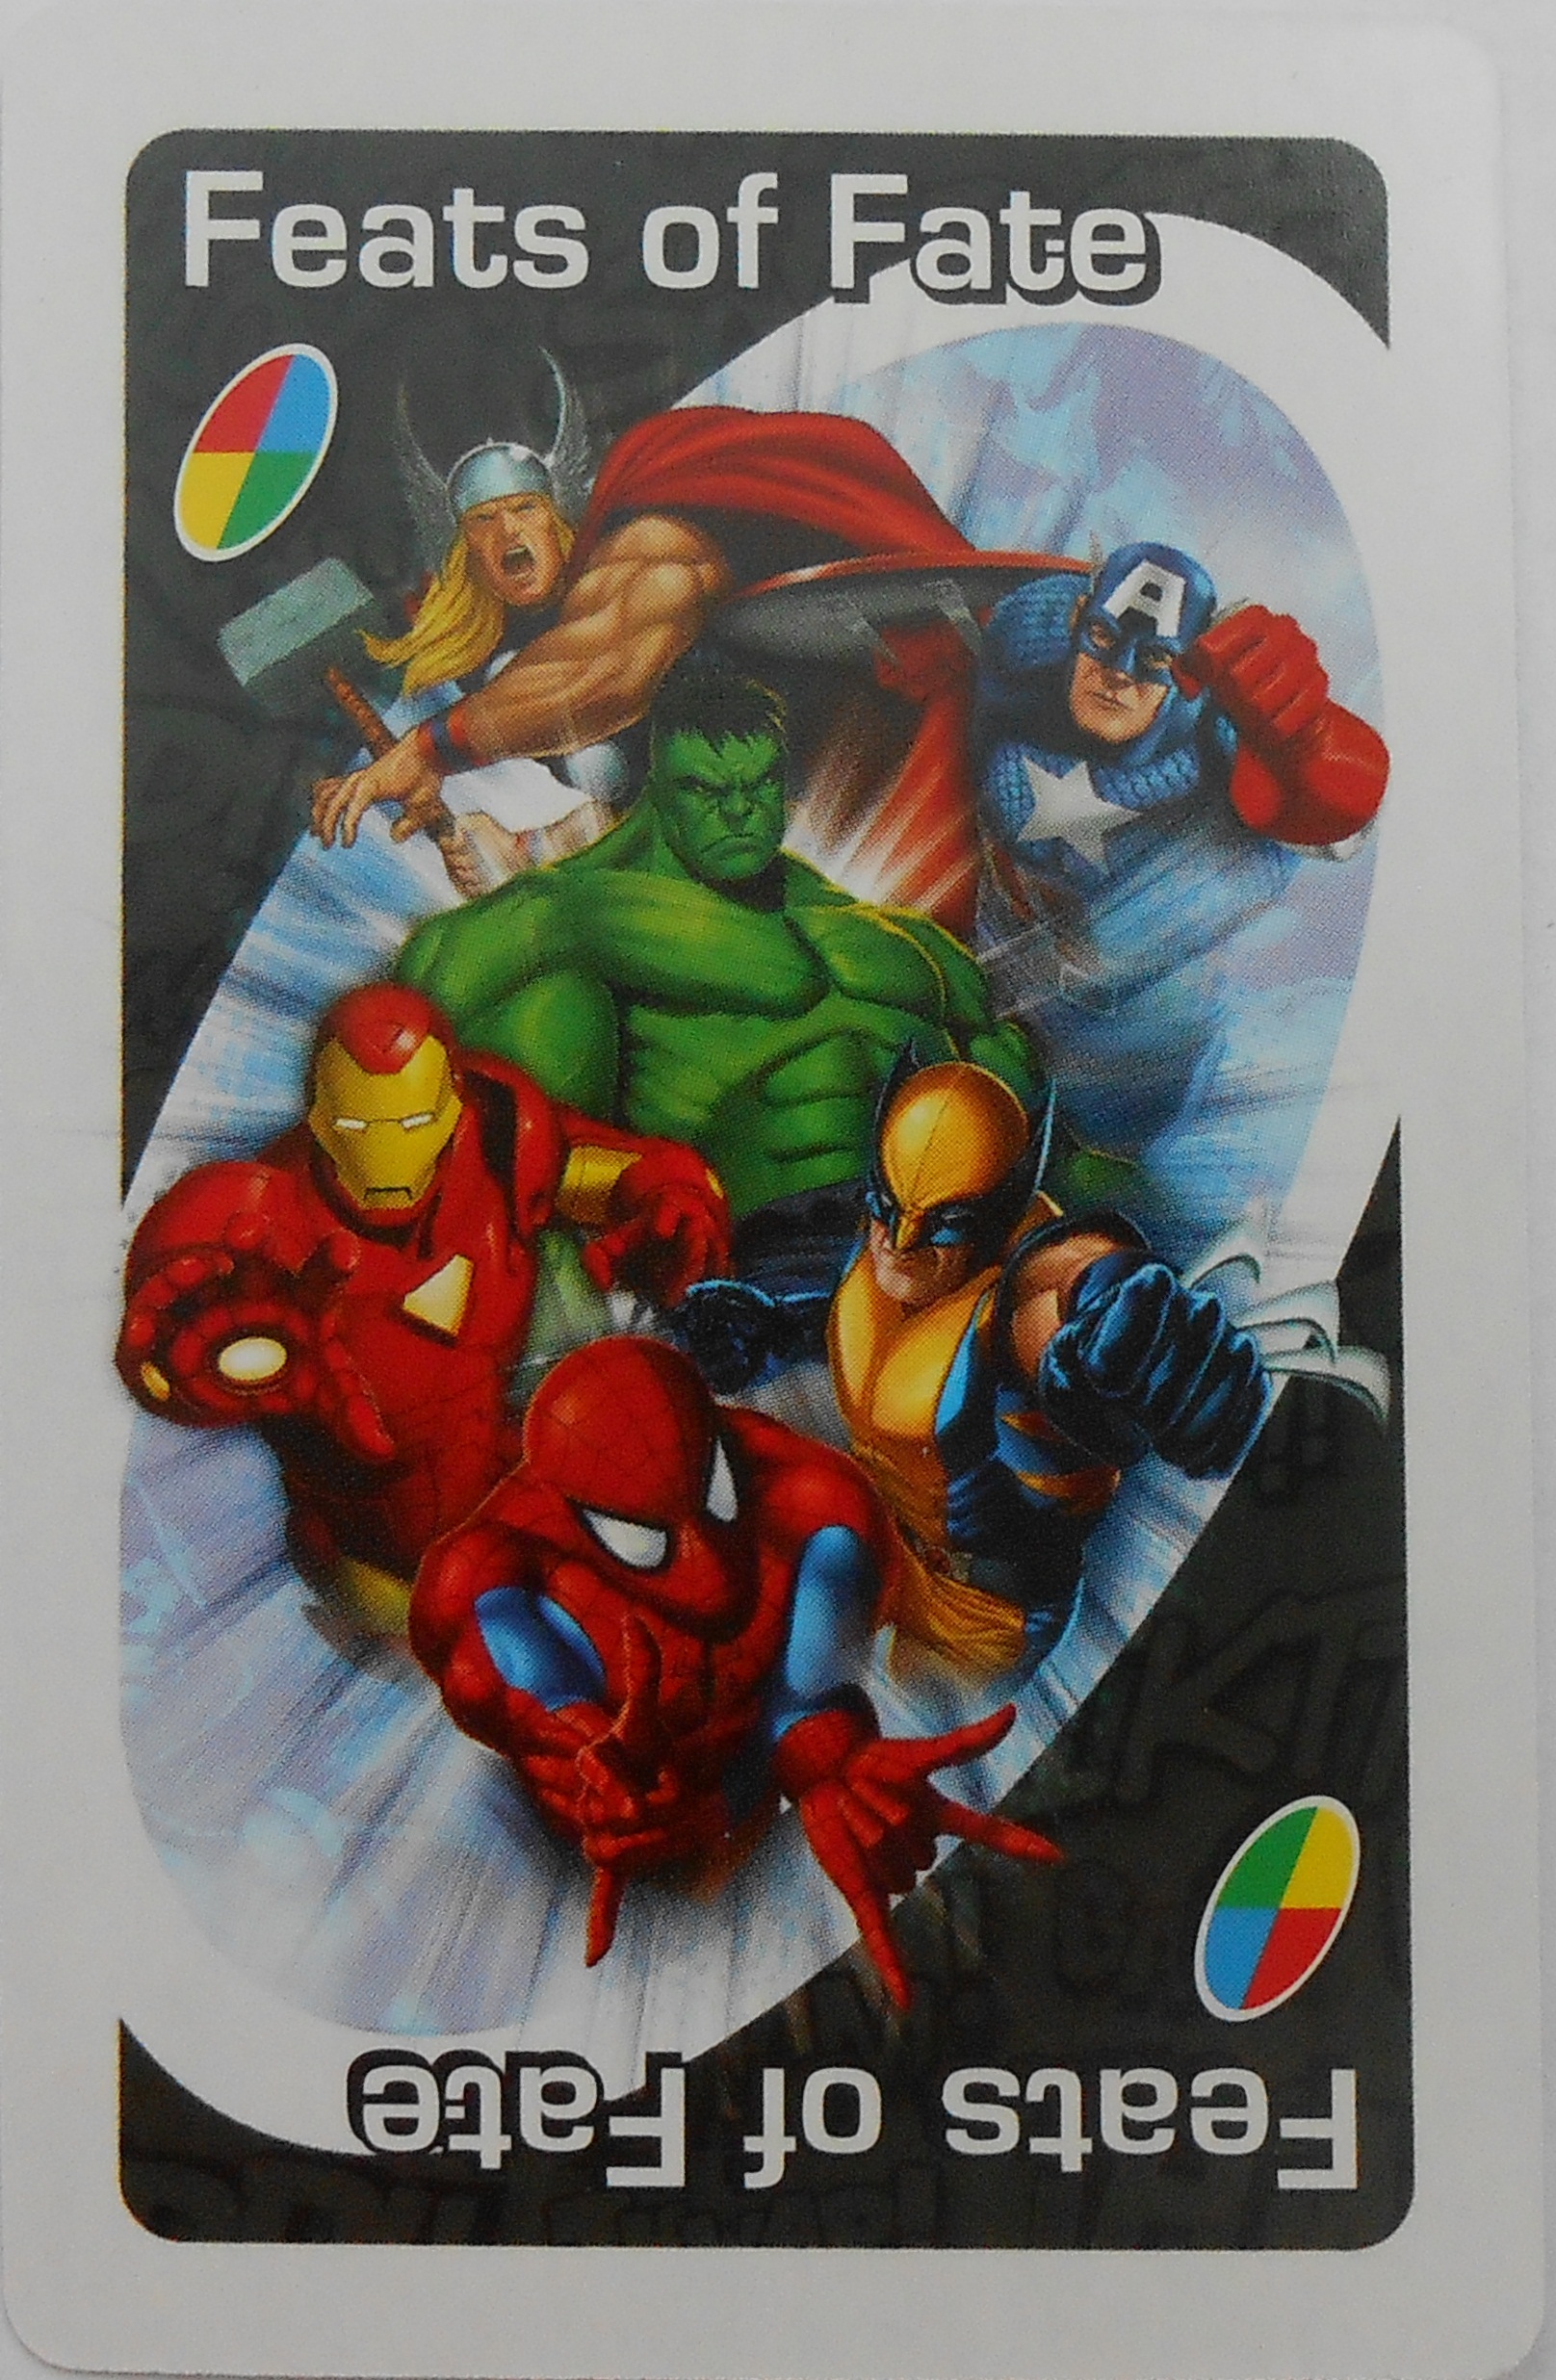 Marvel Heroes Uno (Feats of Fate Wild Card)